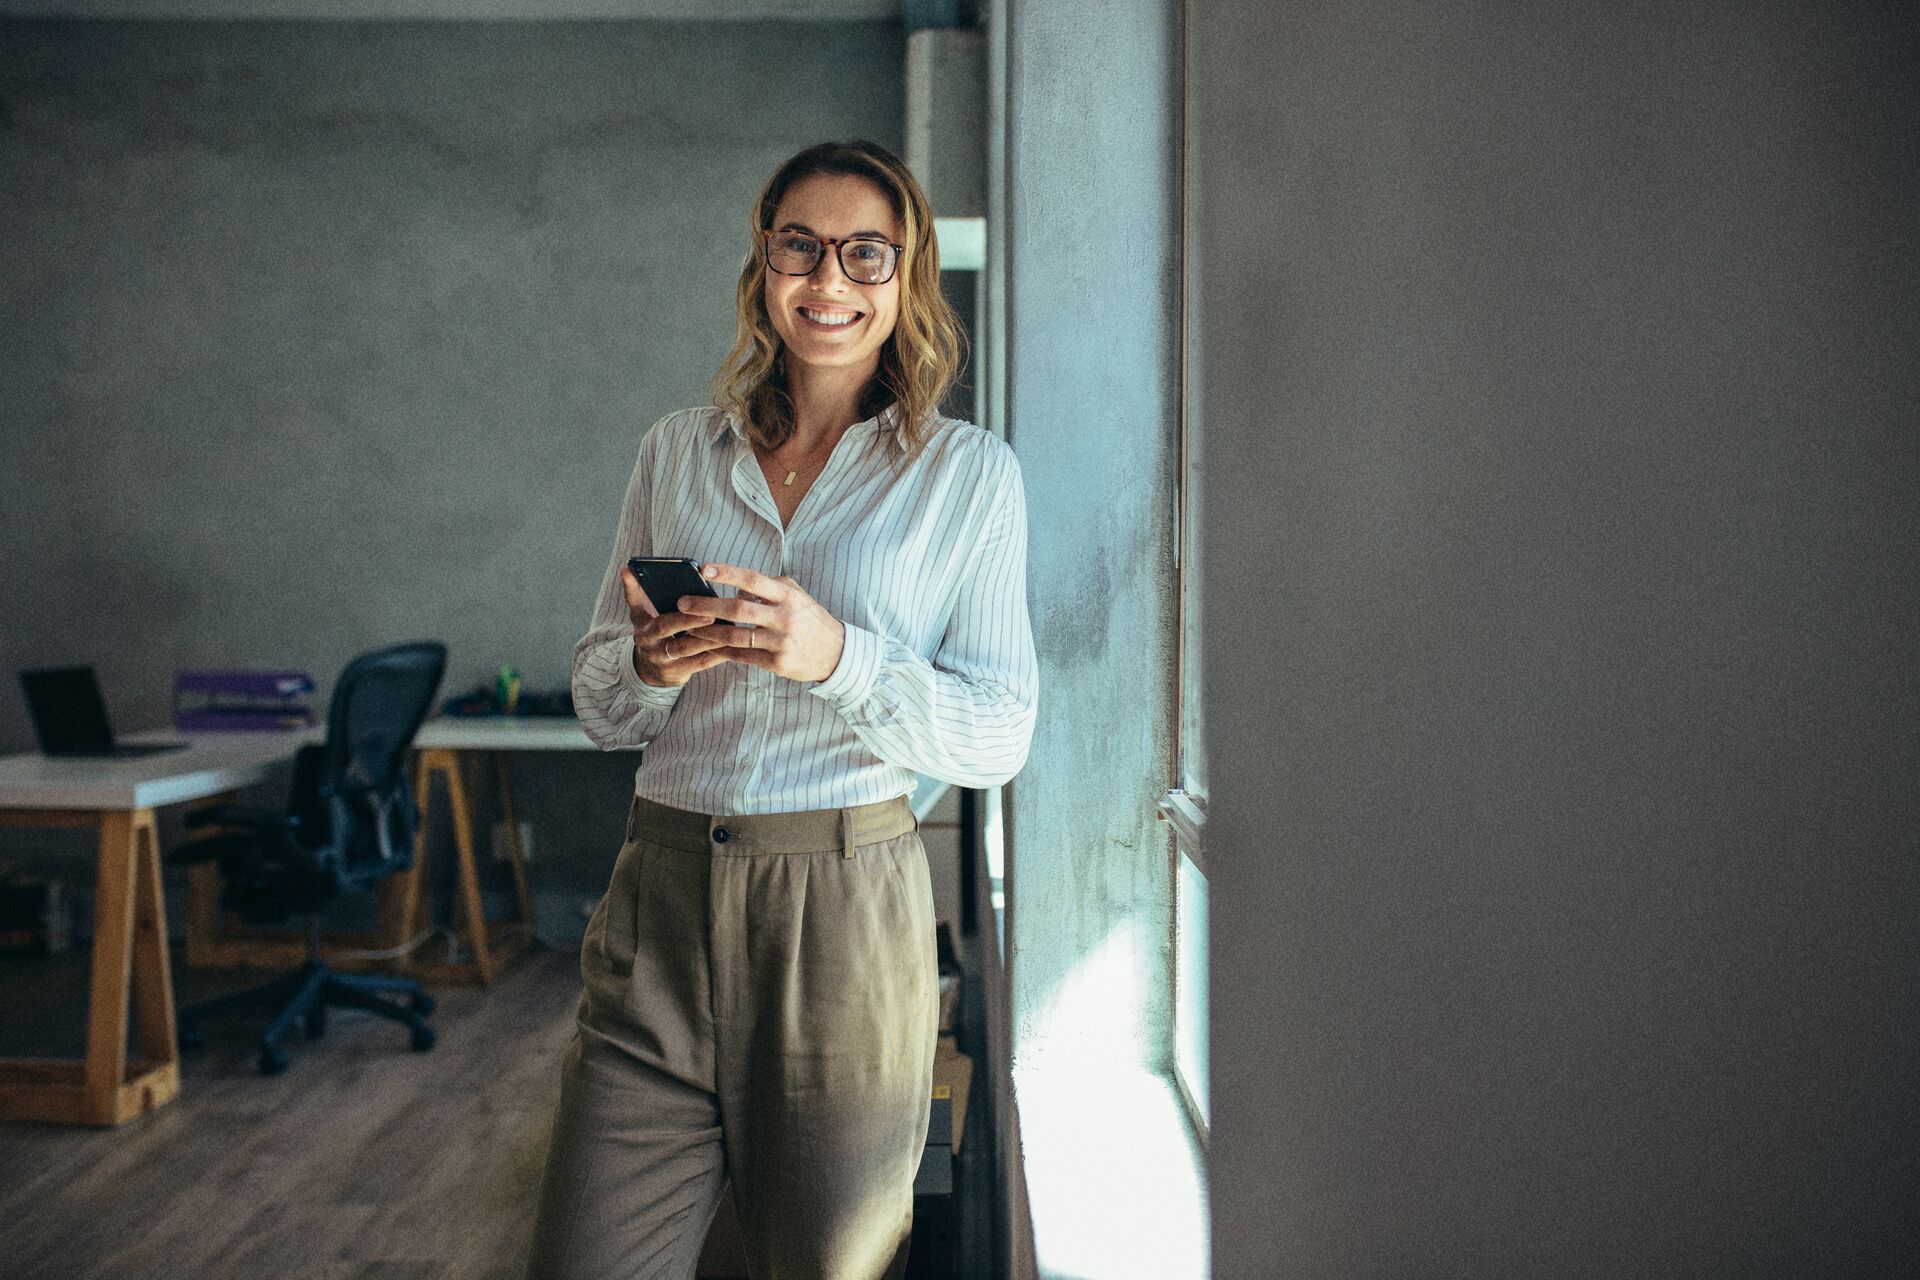 Smiling woman holding her phone in her hands.